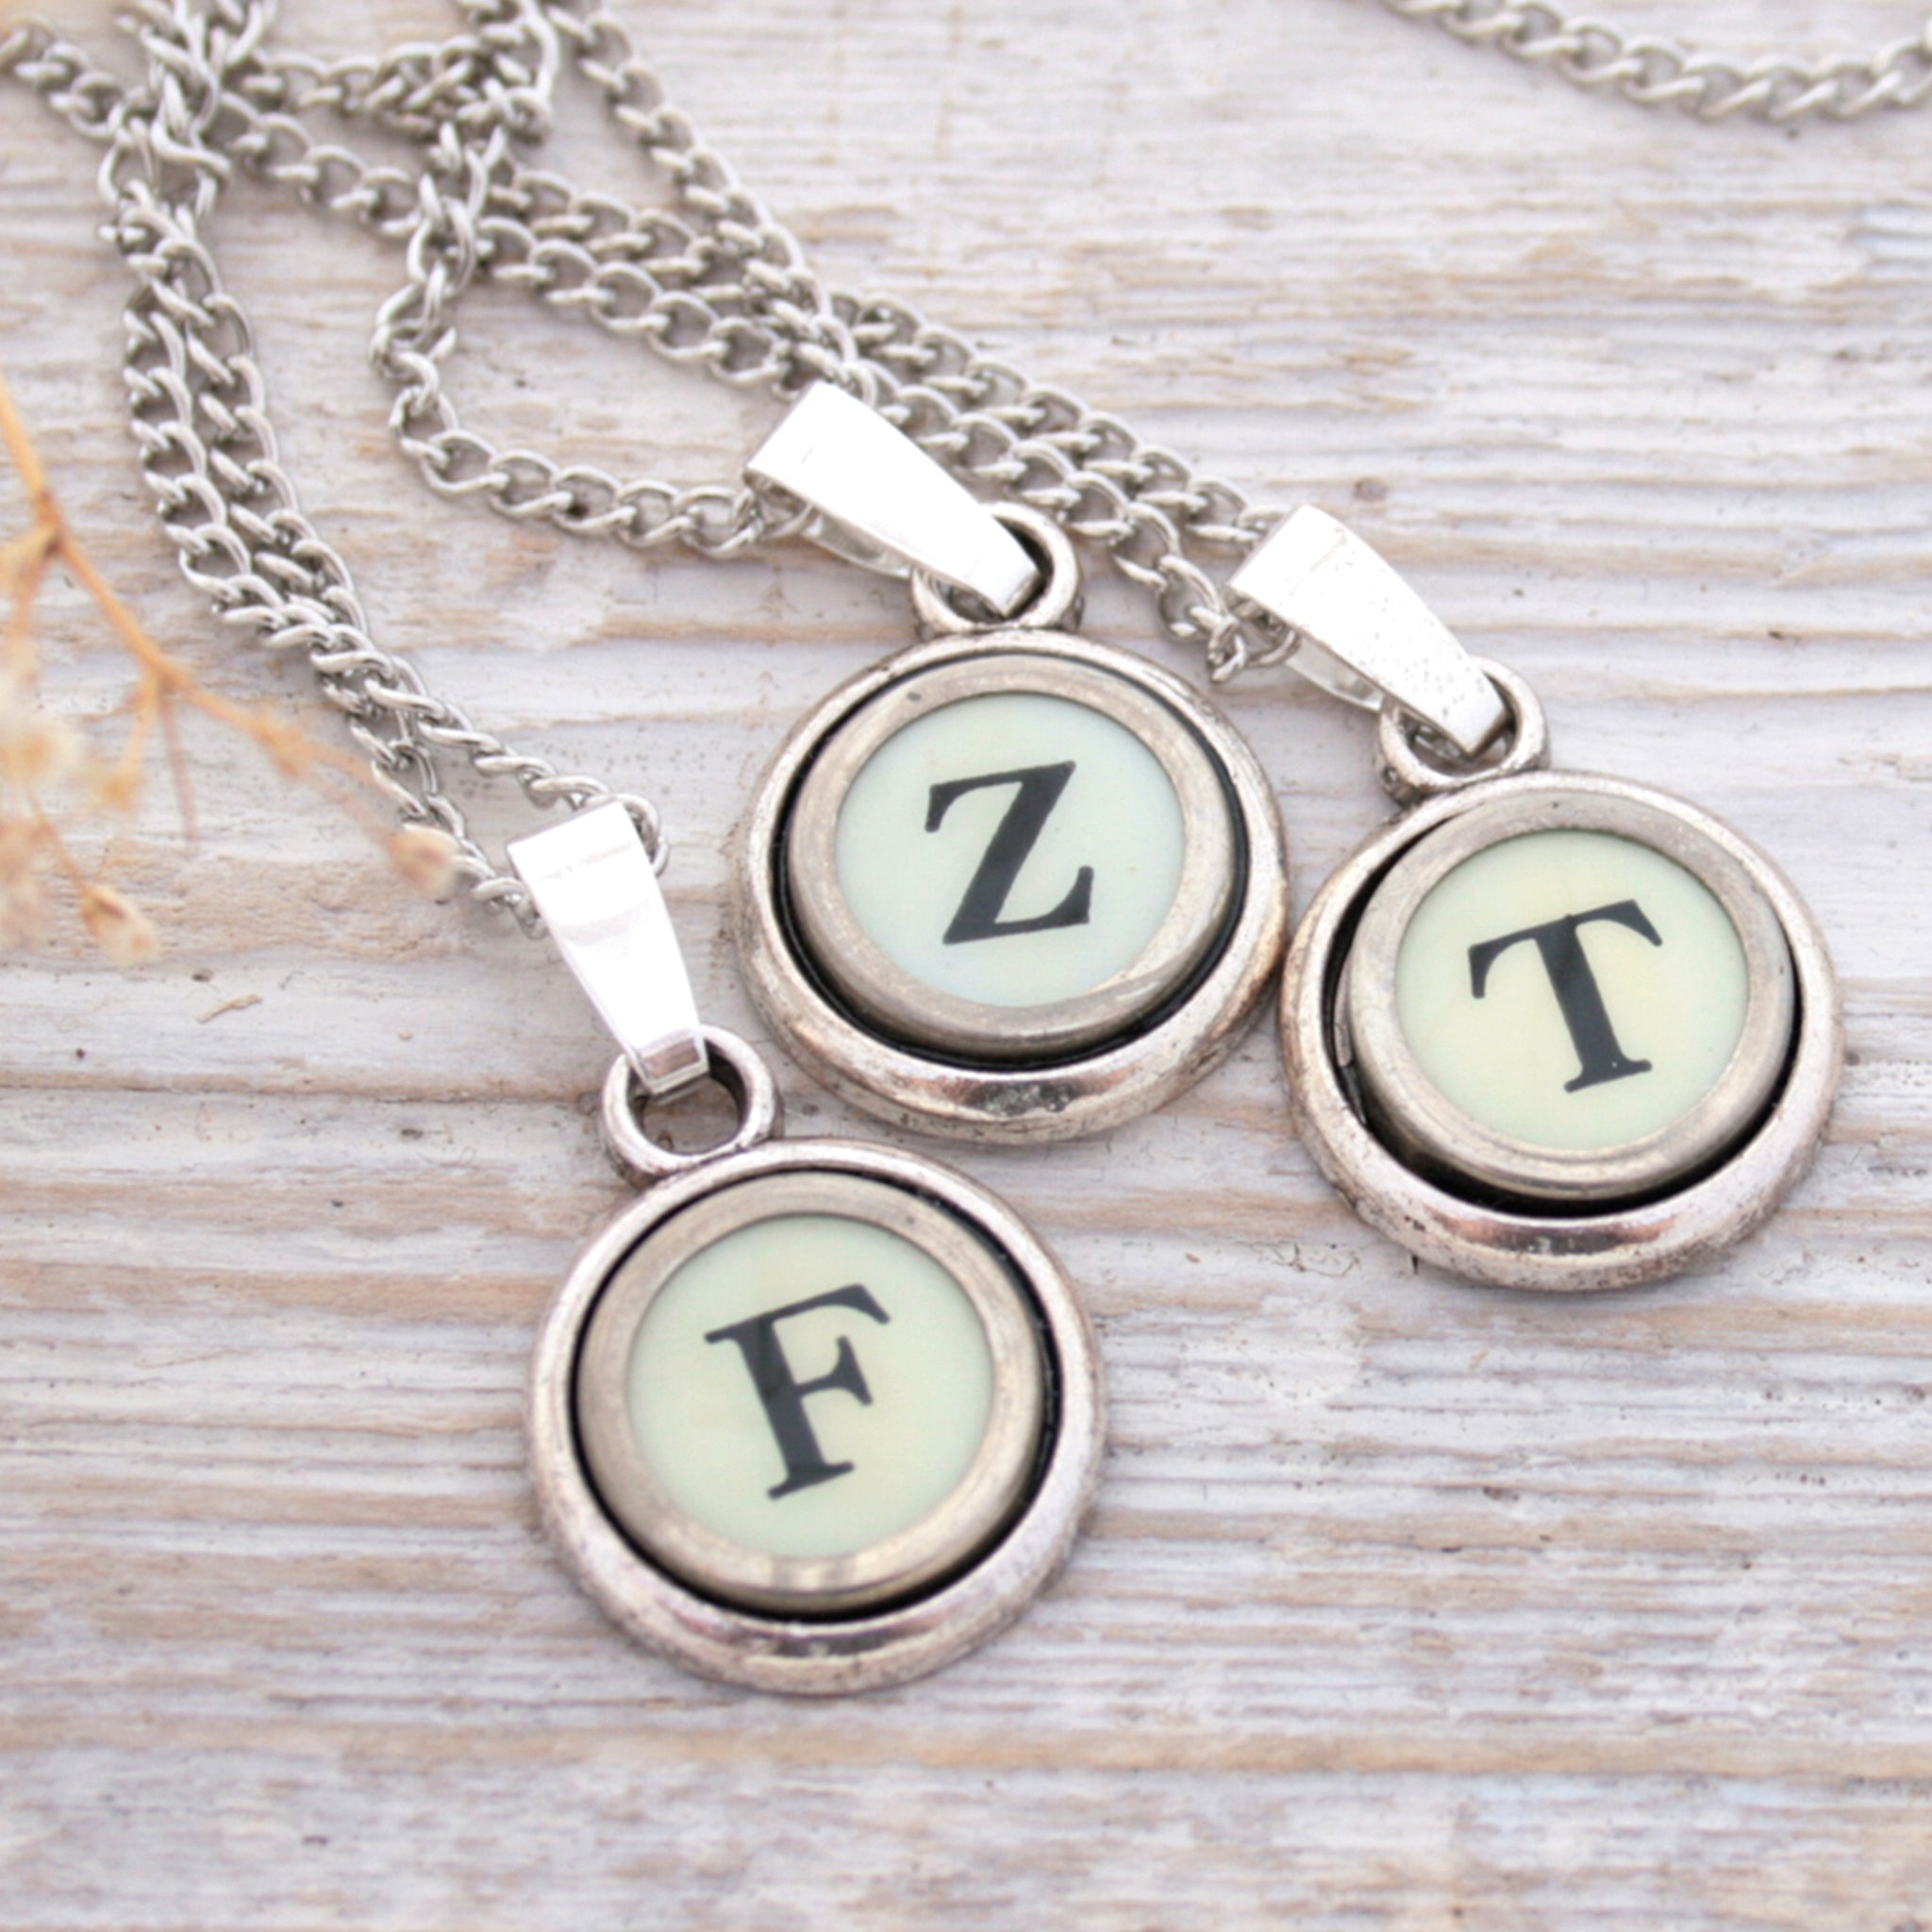 Ivory initial necklaces made of F, Z and T typewriter keys